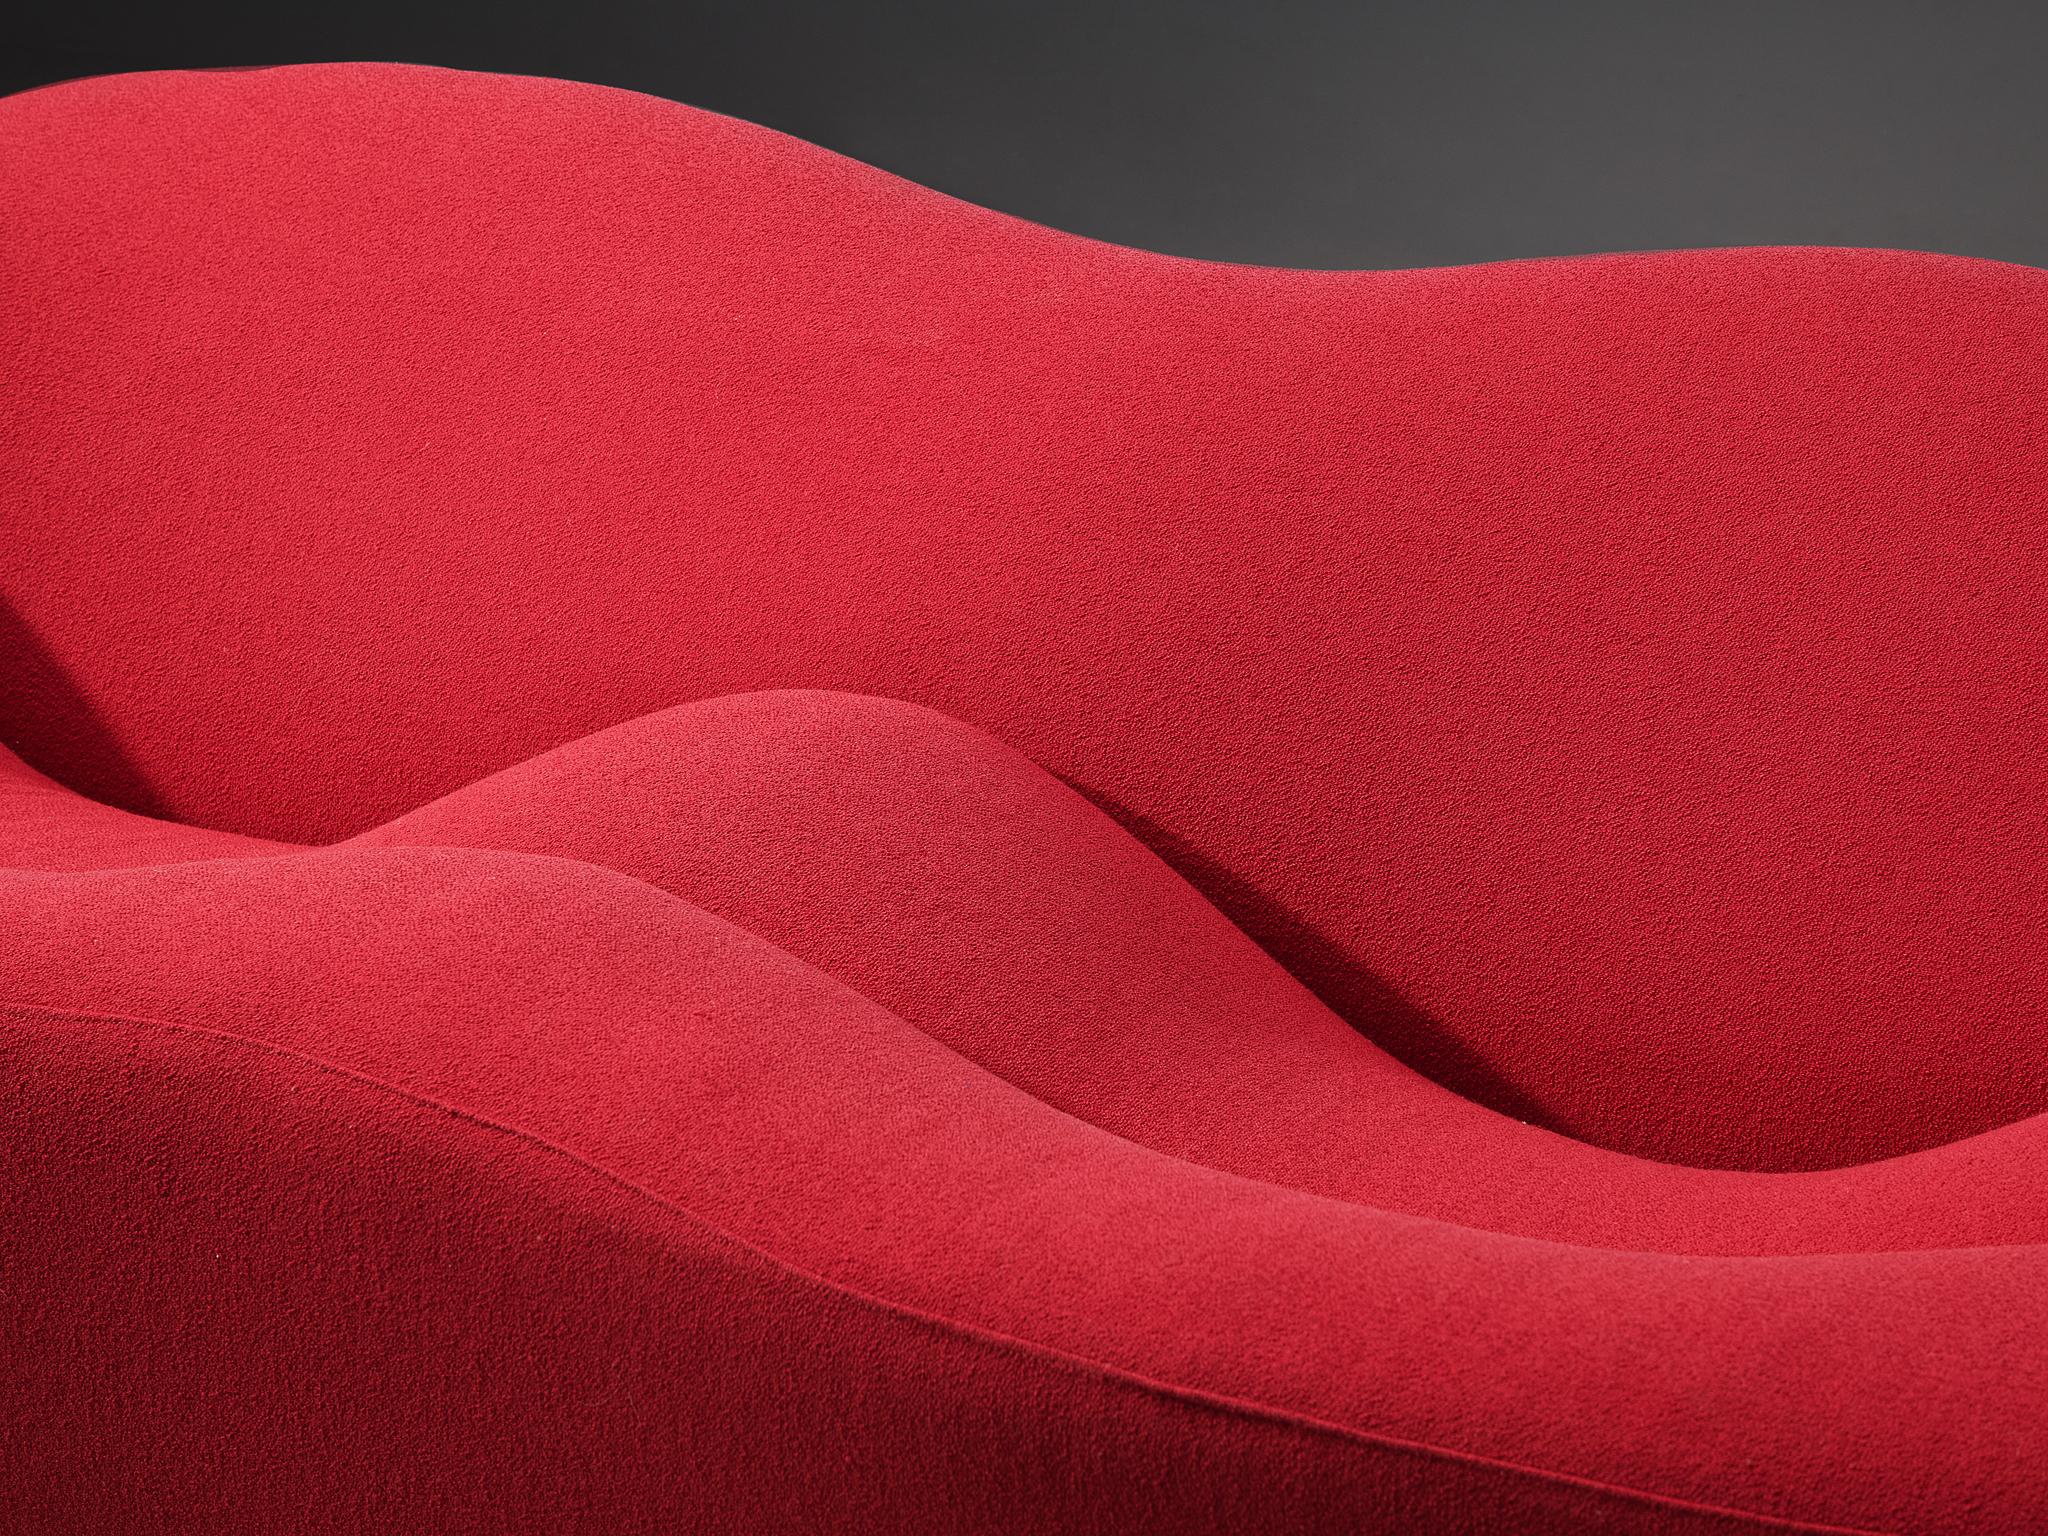 Metal Pierre Paulin for Artifort Three-seater 'ABCD' Sofa in Red Upholstery